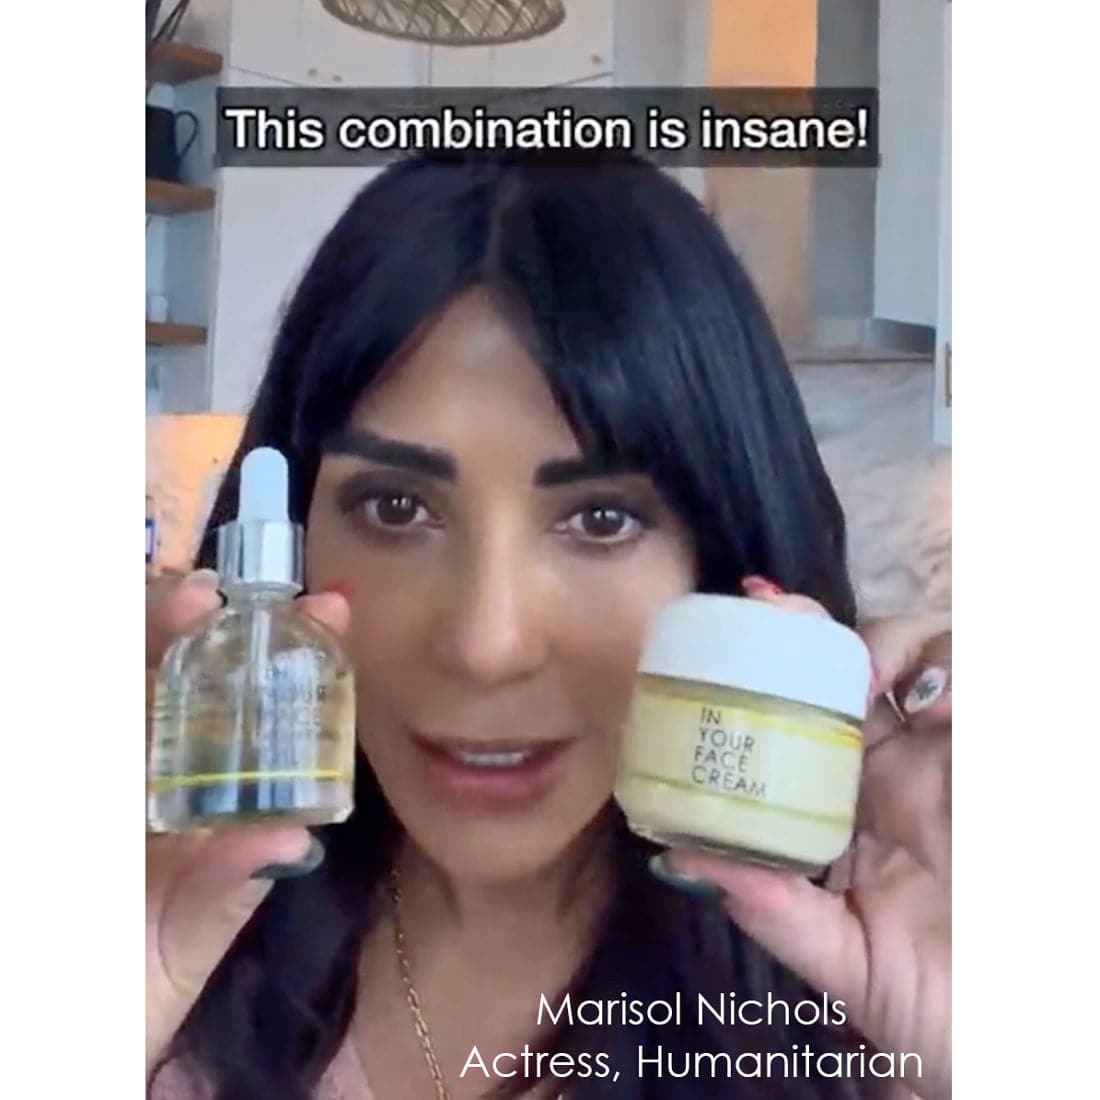 an image of actress and humanitarian Marisol Nichols holding up a bottle of NOURISHING OIL and CREAM